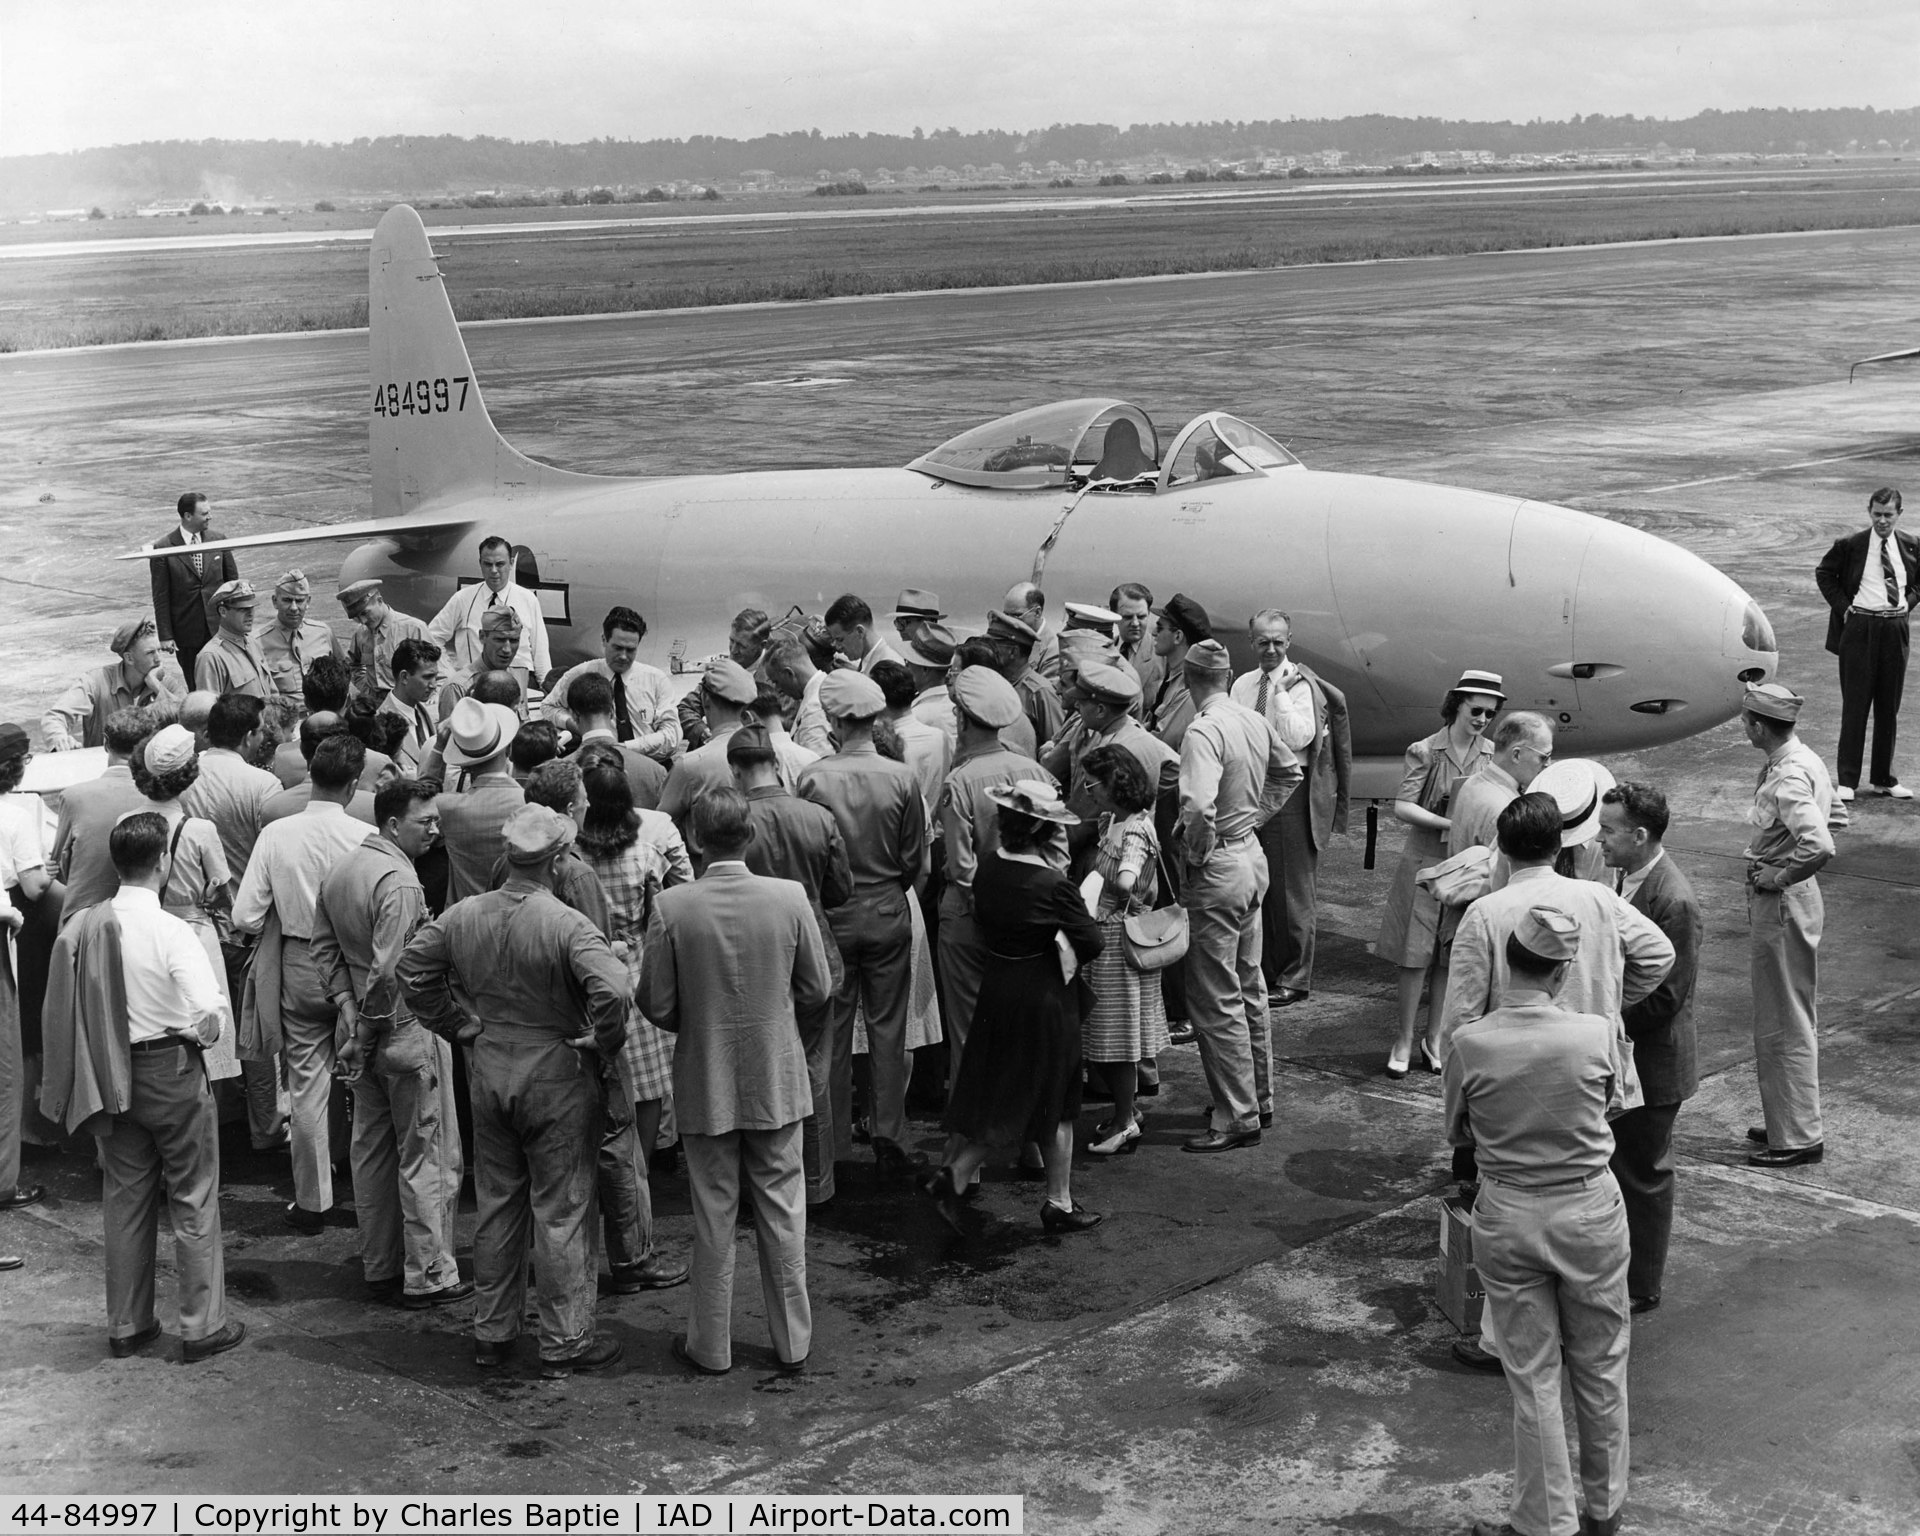 44-84997, 1944 Lockheed P-80A-1-LO Shooting Star C/N 080-1020, National Airport Photo. Taken by Charles Baptie who was a Photorapher for Captal Airlines. Passedaway in 2000